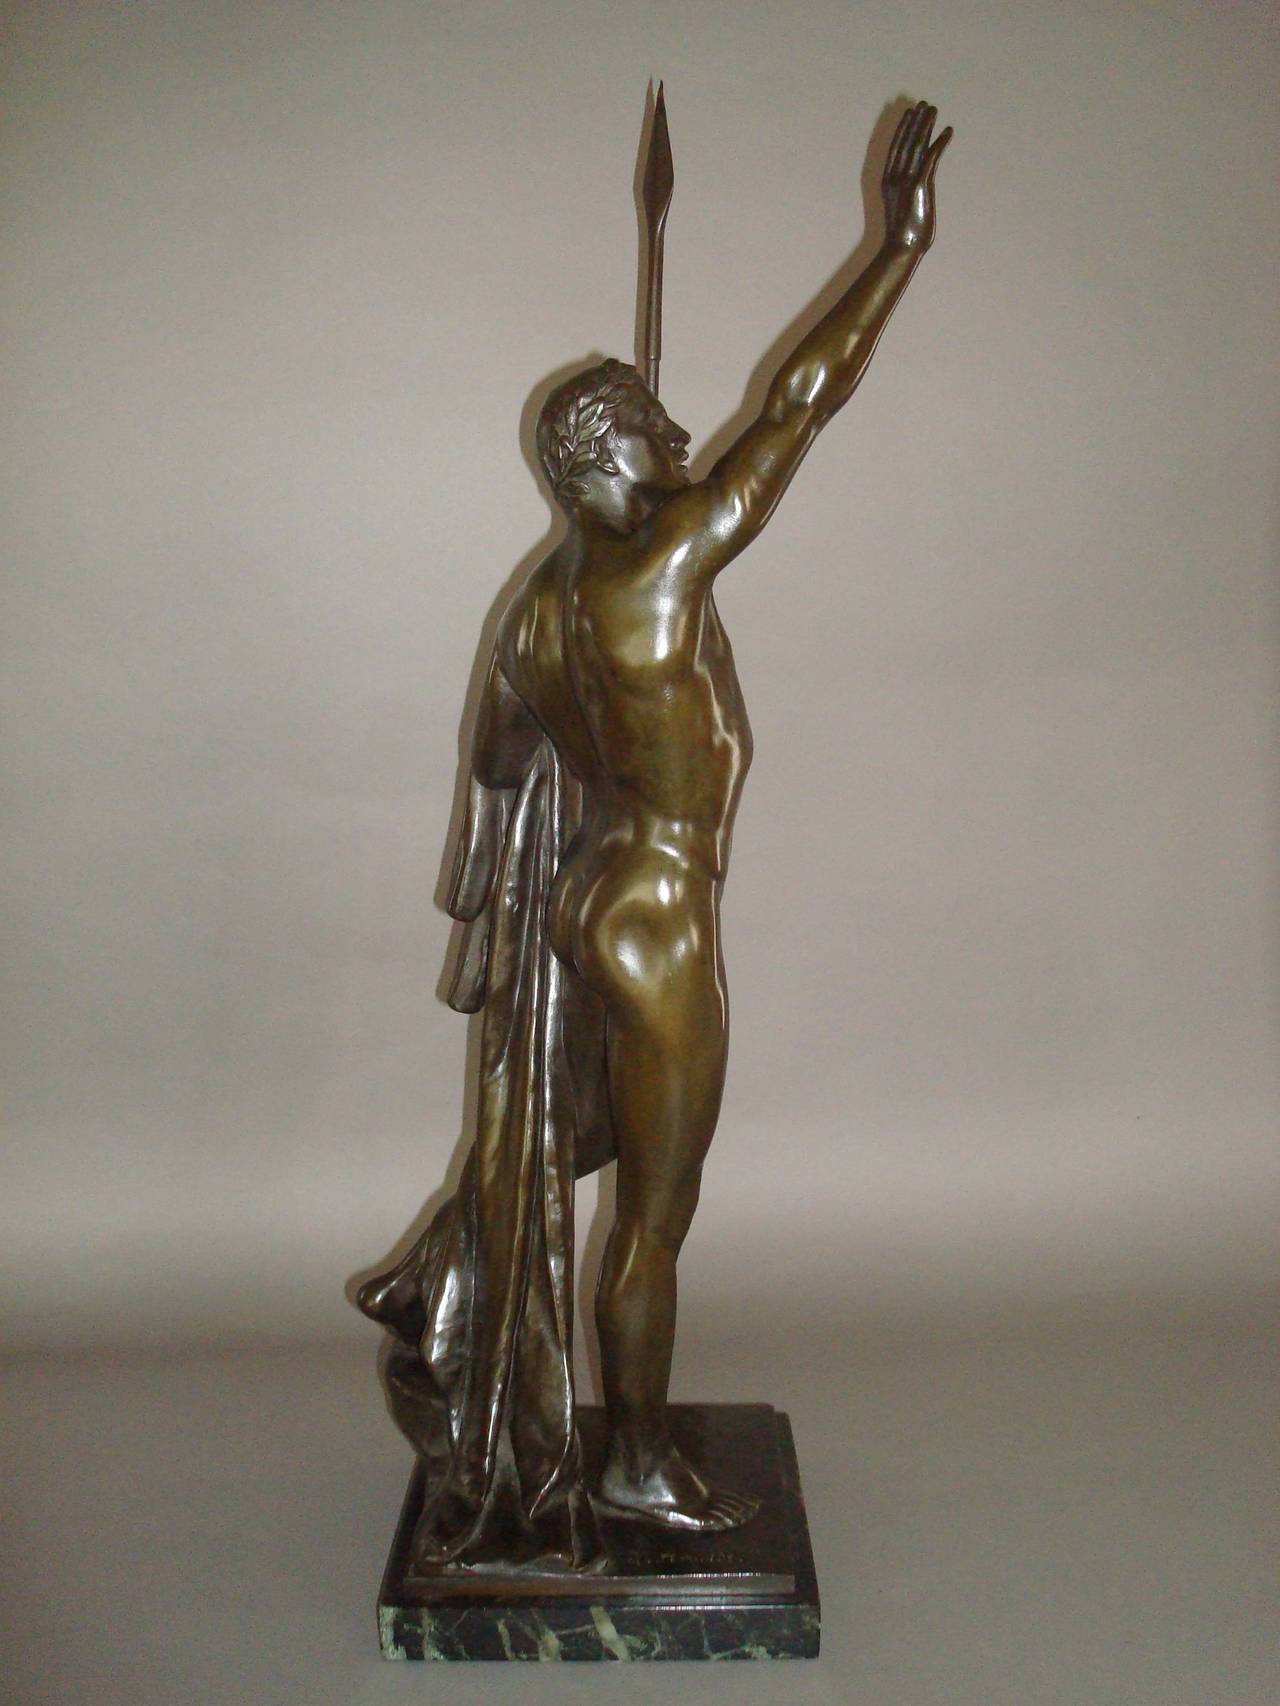 A 19th century bronze sculpture of a victorious nude athlete,  with his right arm raised triumphantly, his left hand holding a javelin and a robe draped over his arm; with a rich brown patina, raised on a verde antique marble plinth.  
Signed 'H